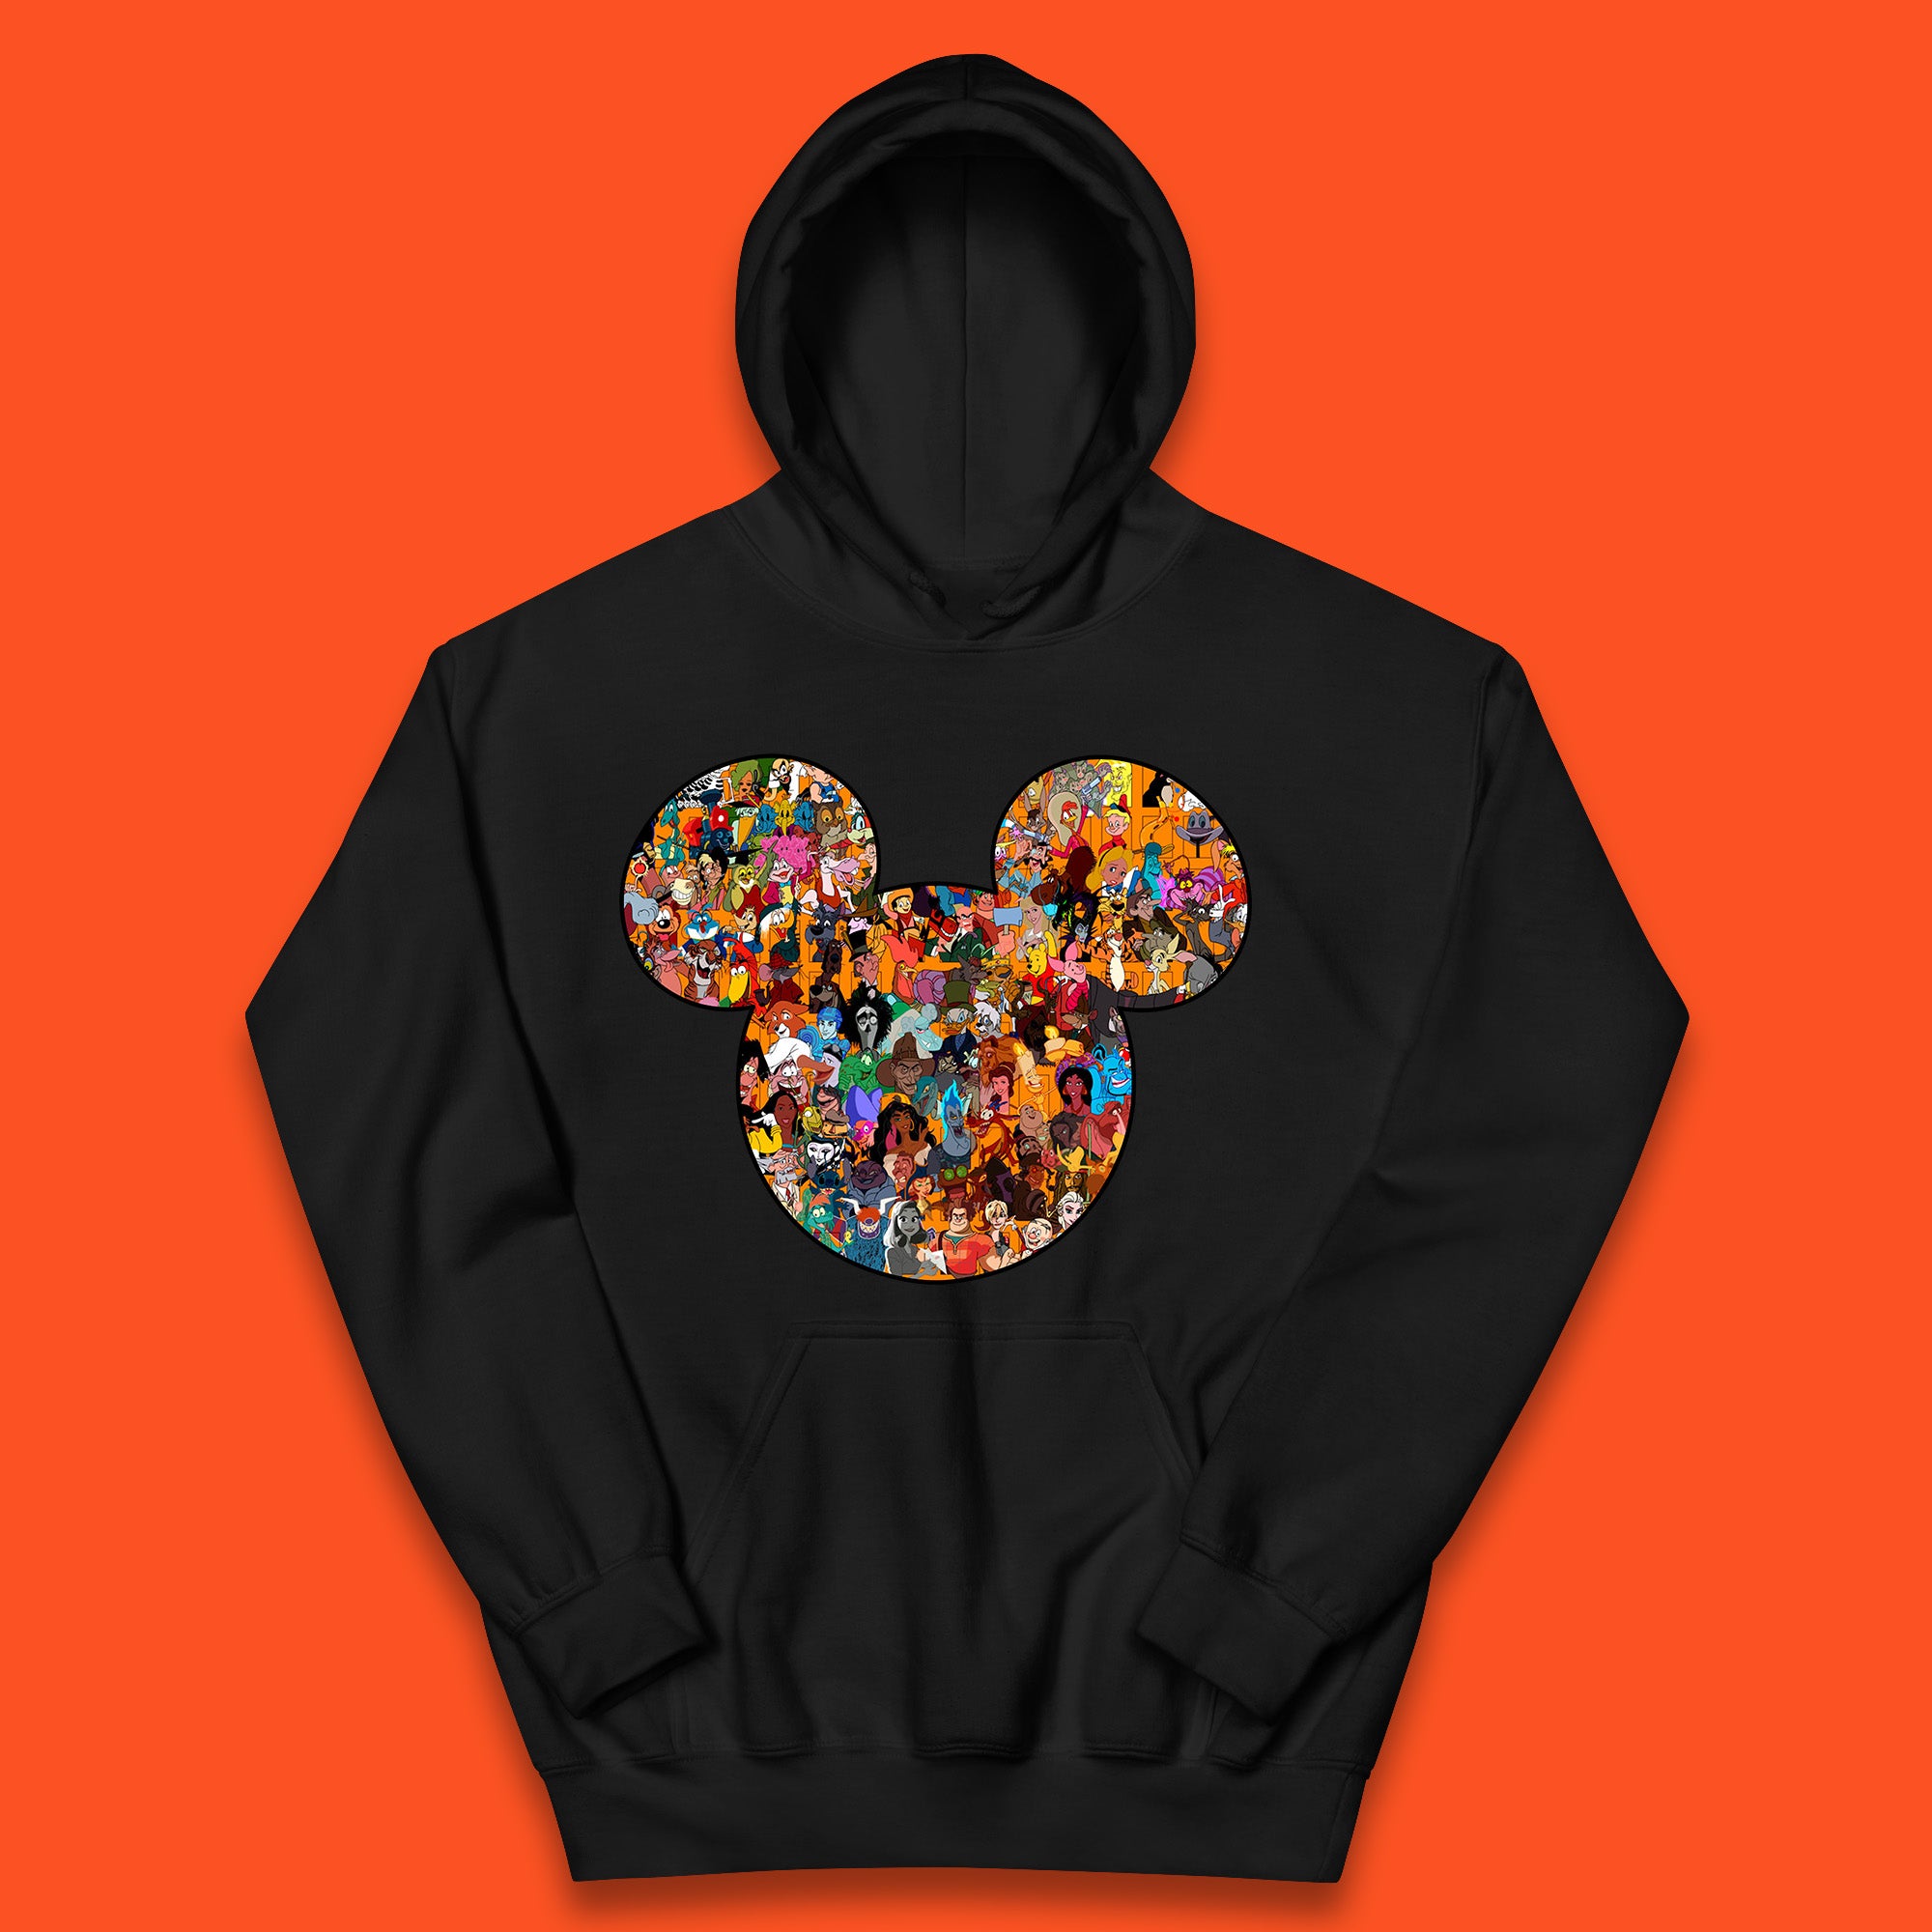 Disney Mickey Mouse Minnie Mouse Head All Disney Characters Together Disney Family Animated Cartoons Movies Characters Disney World Kids Hoodie